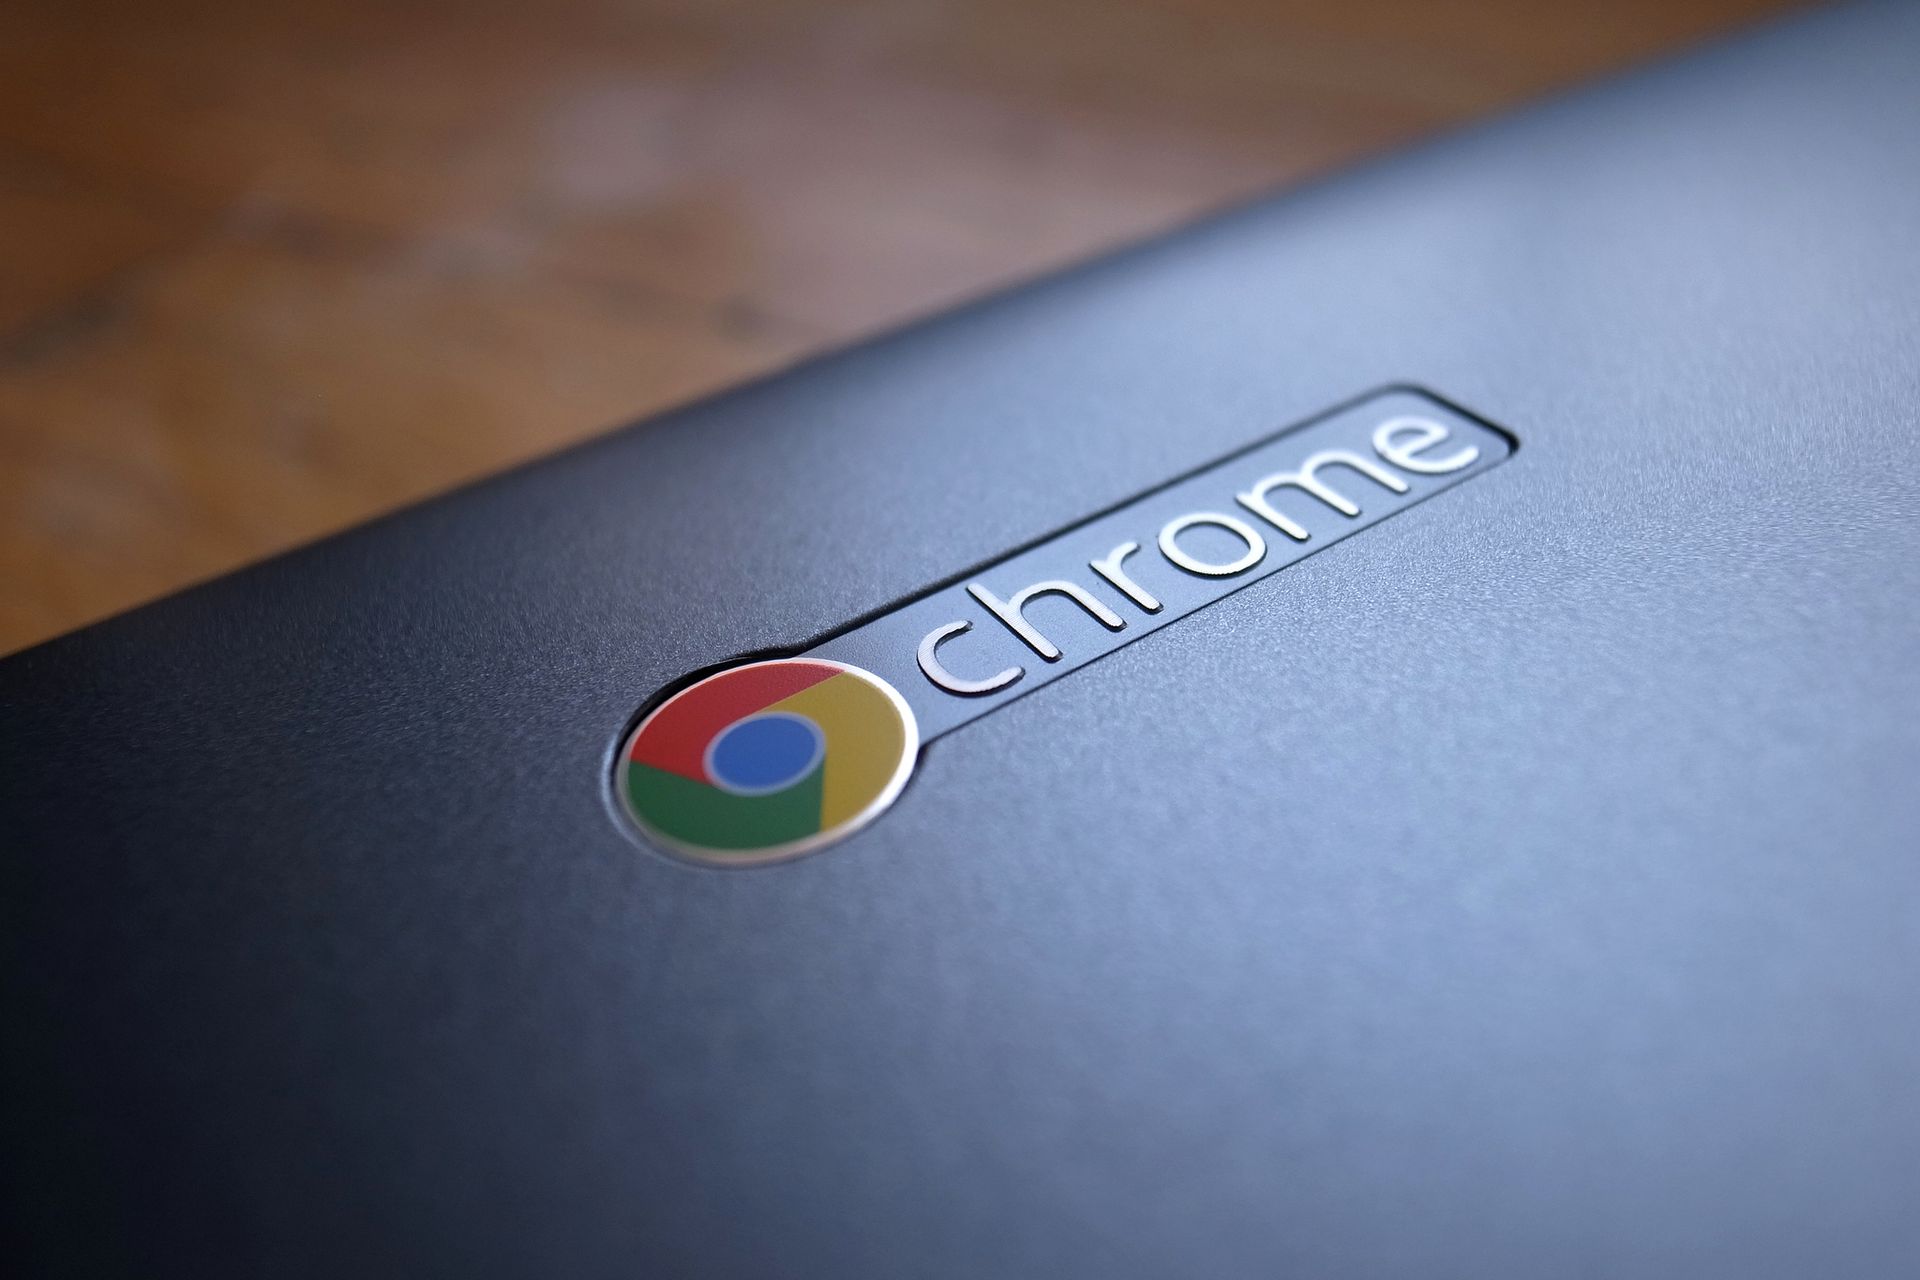 How to get VPN on Chromebook?